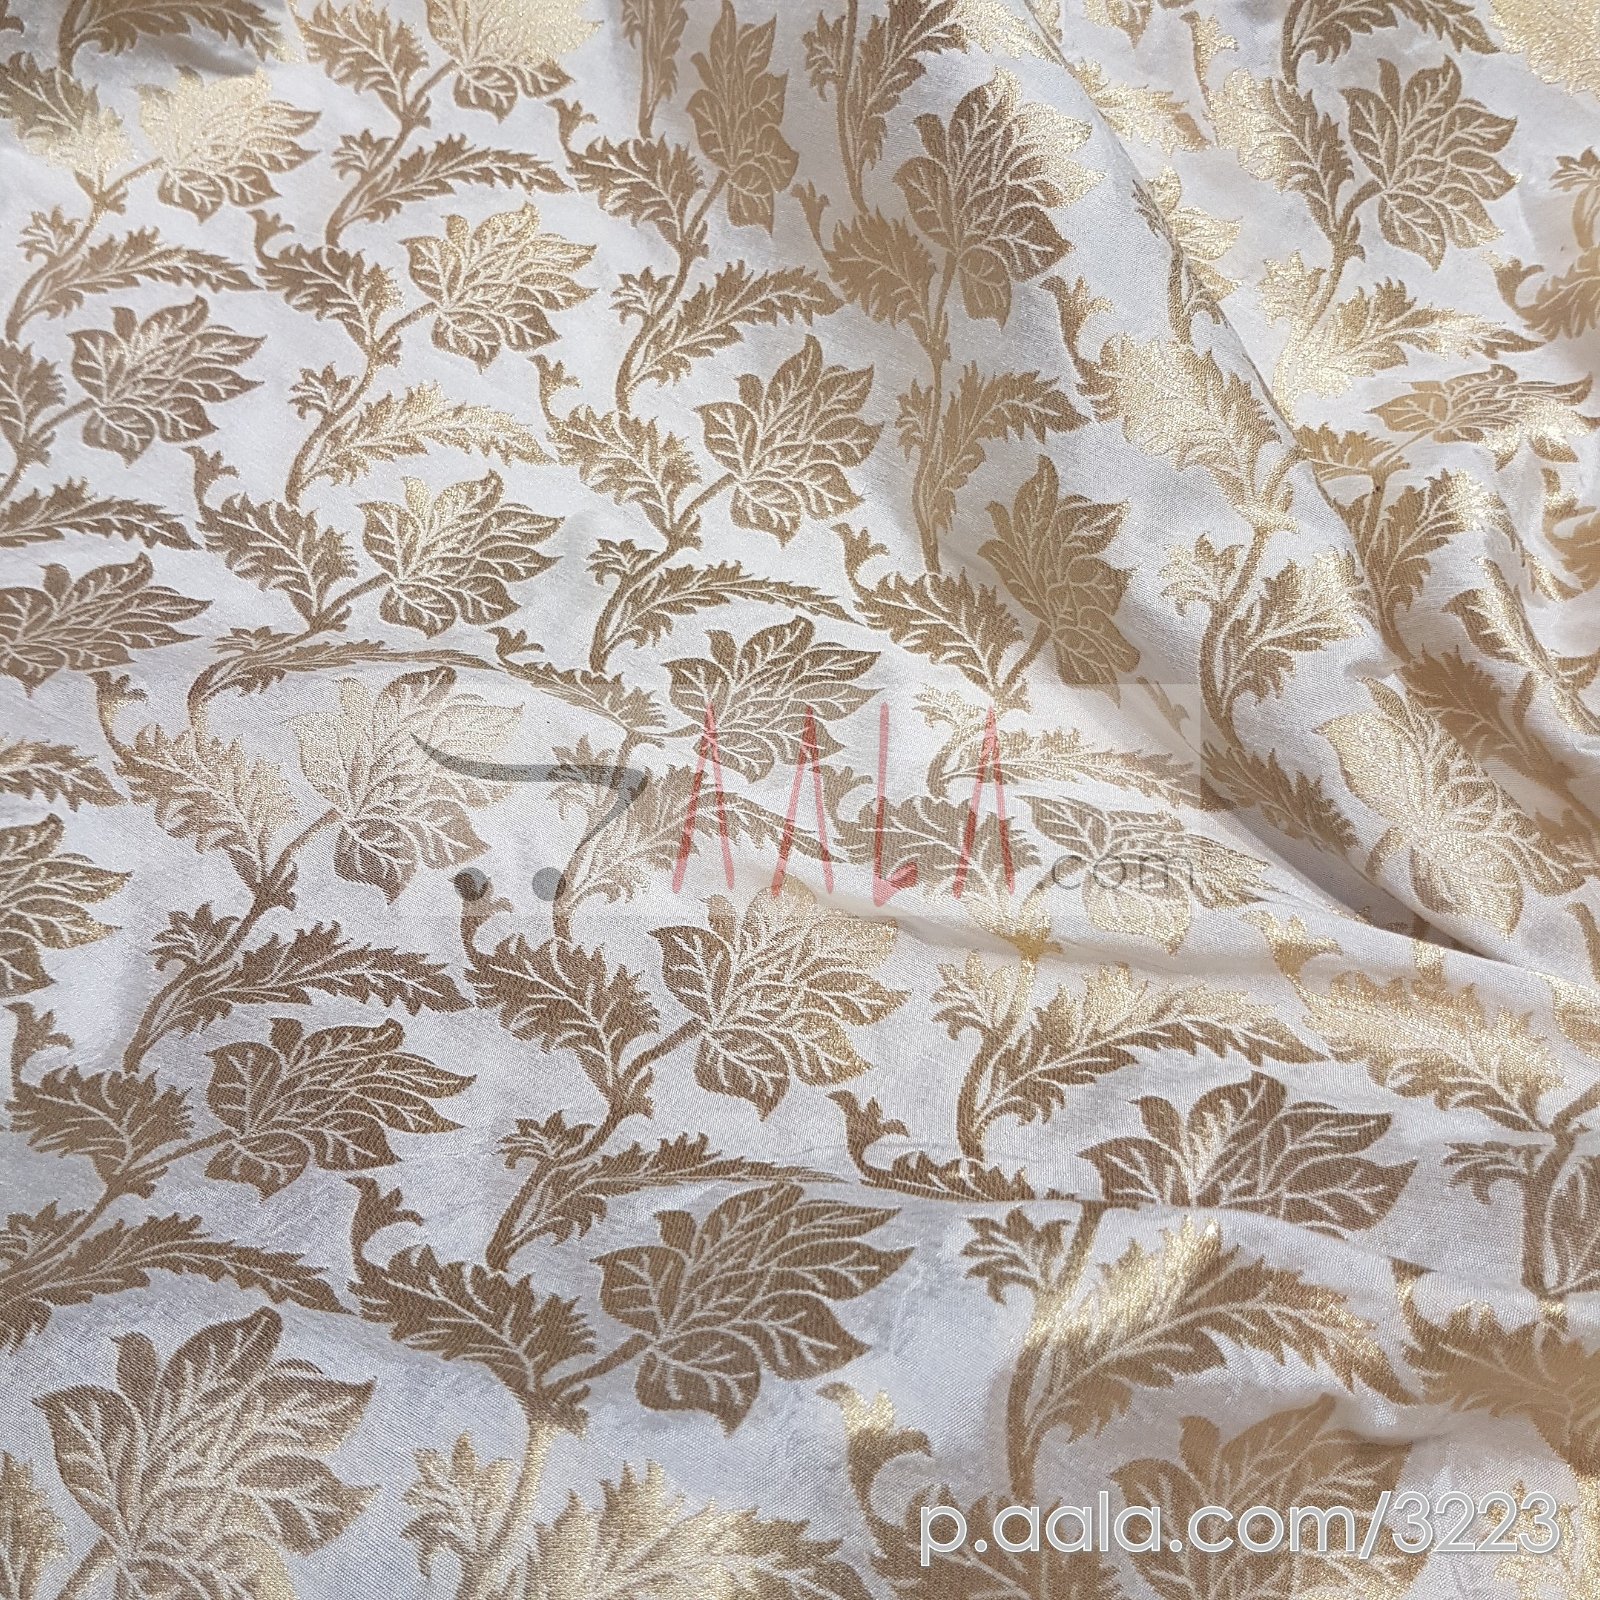 Brocade Silk Viscose 44 Inches Dyeable Per Metre #3223